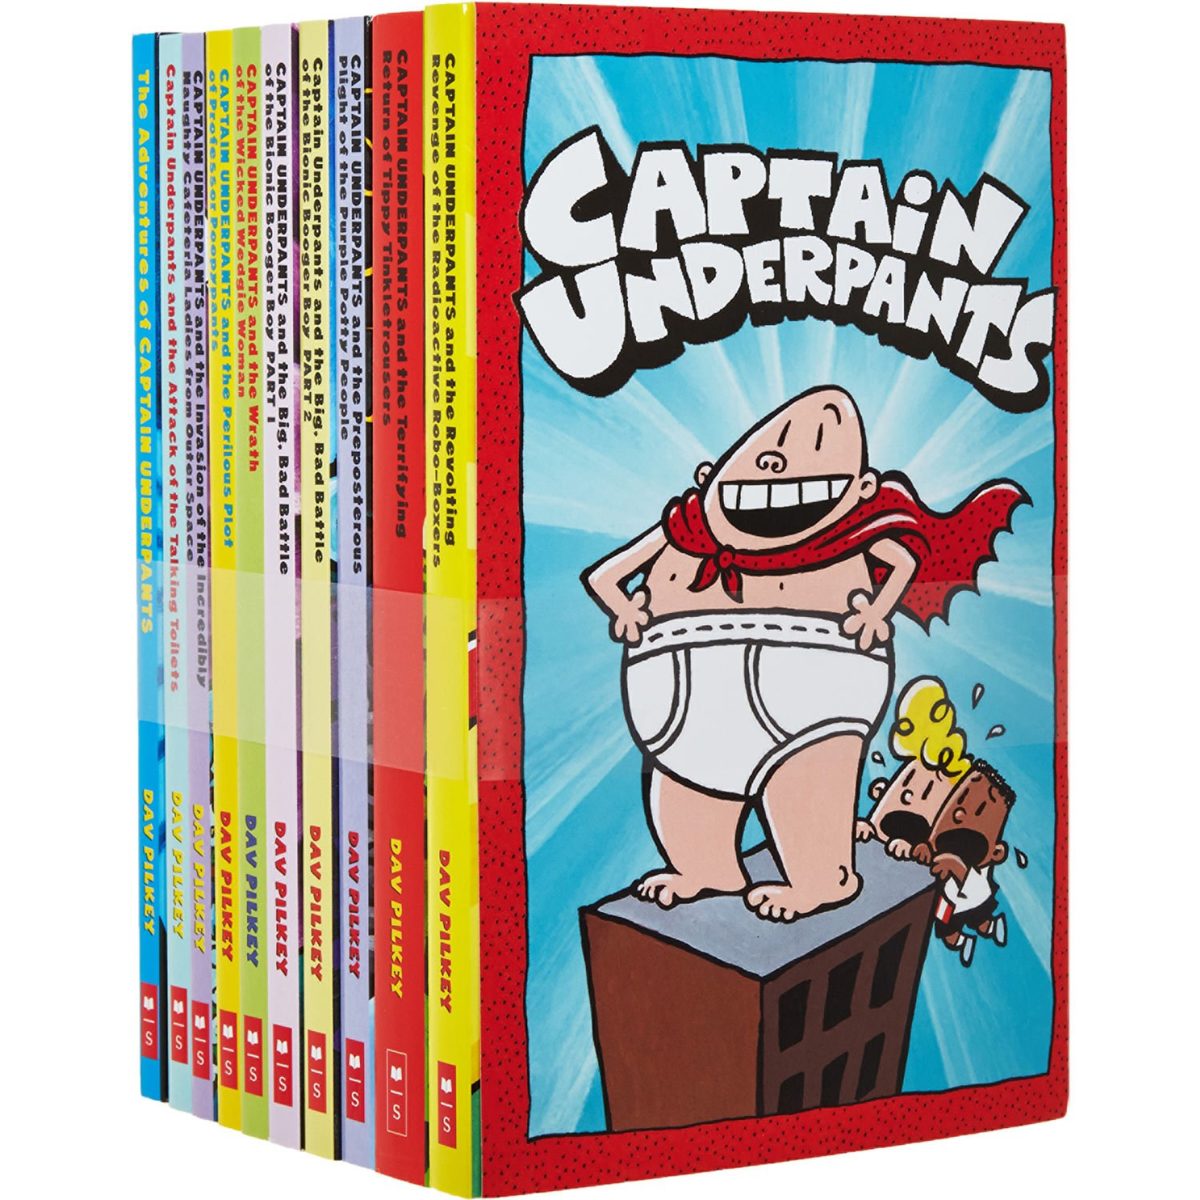 Captain Underpants 10 Book Set - Top Toys and Gifts for Eight Year Old Boys